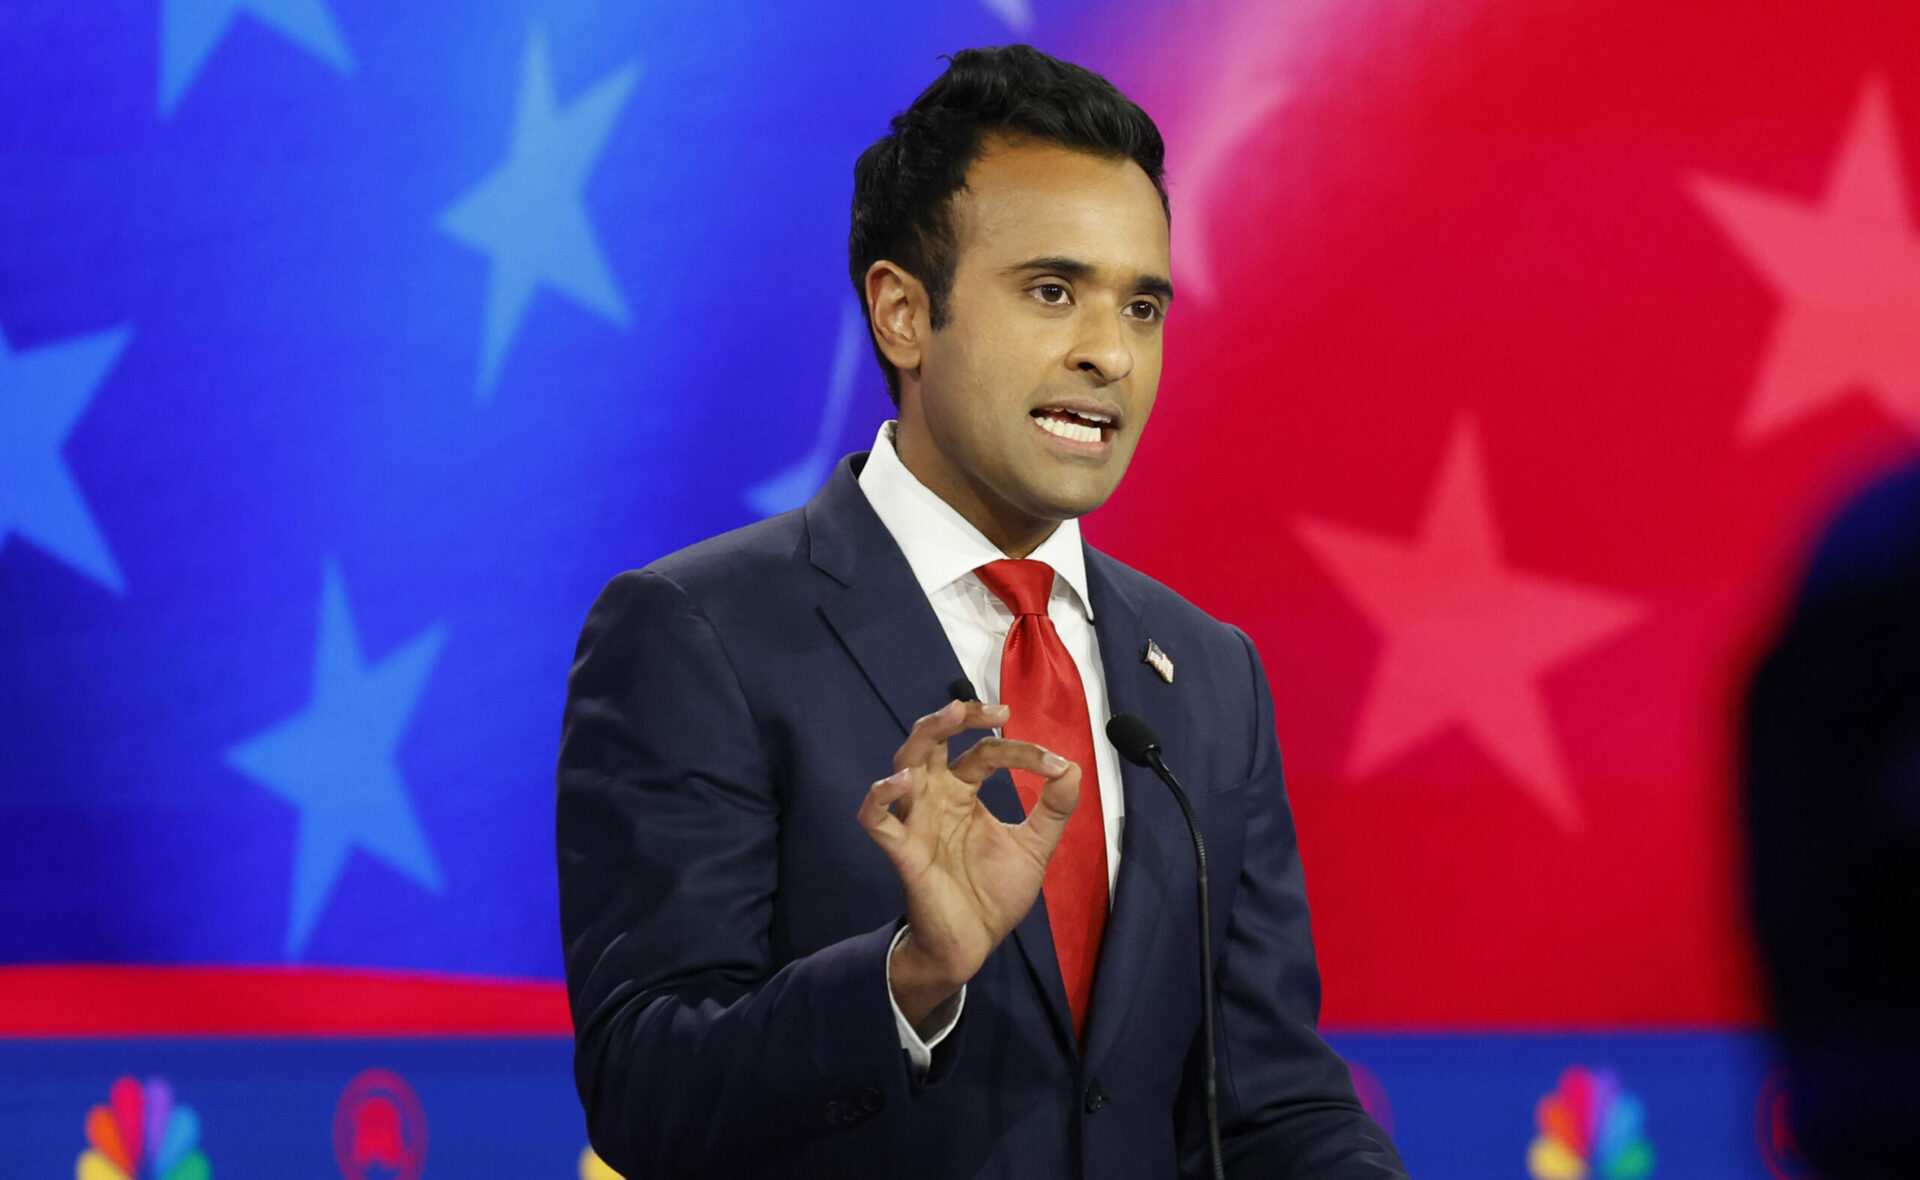 NH man arrested for death threat against presidential candidate Vivek Ramaswamy